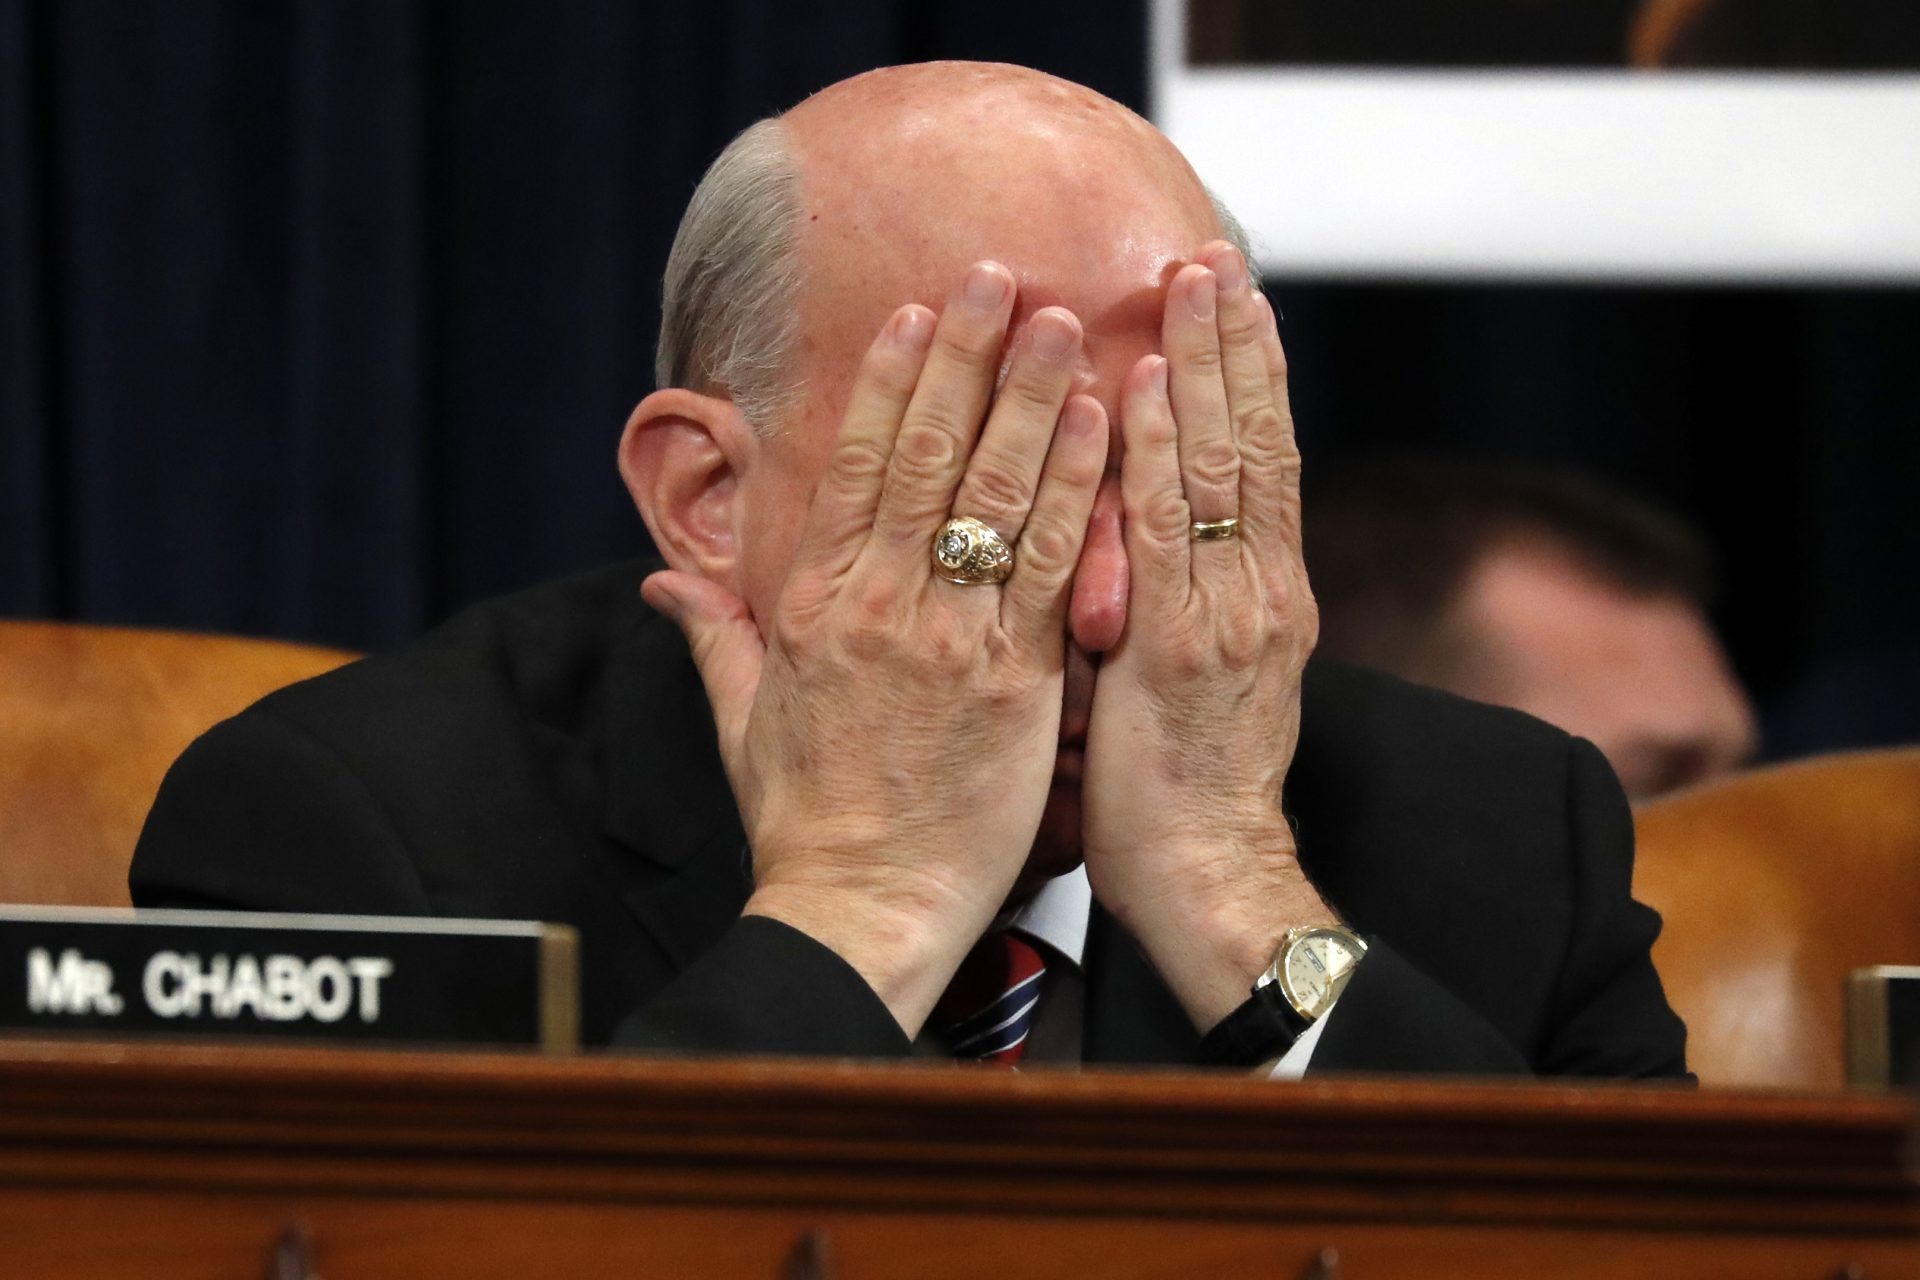 Rep. Louie Gohmert, R-Texas, rubs his face during a House Judiciary Committee markup of the articles of impeachment against President Donald Trump, Wednesday, Dec. 11, 2019, on Capitol Hill in Washington.